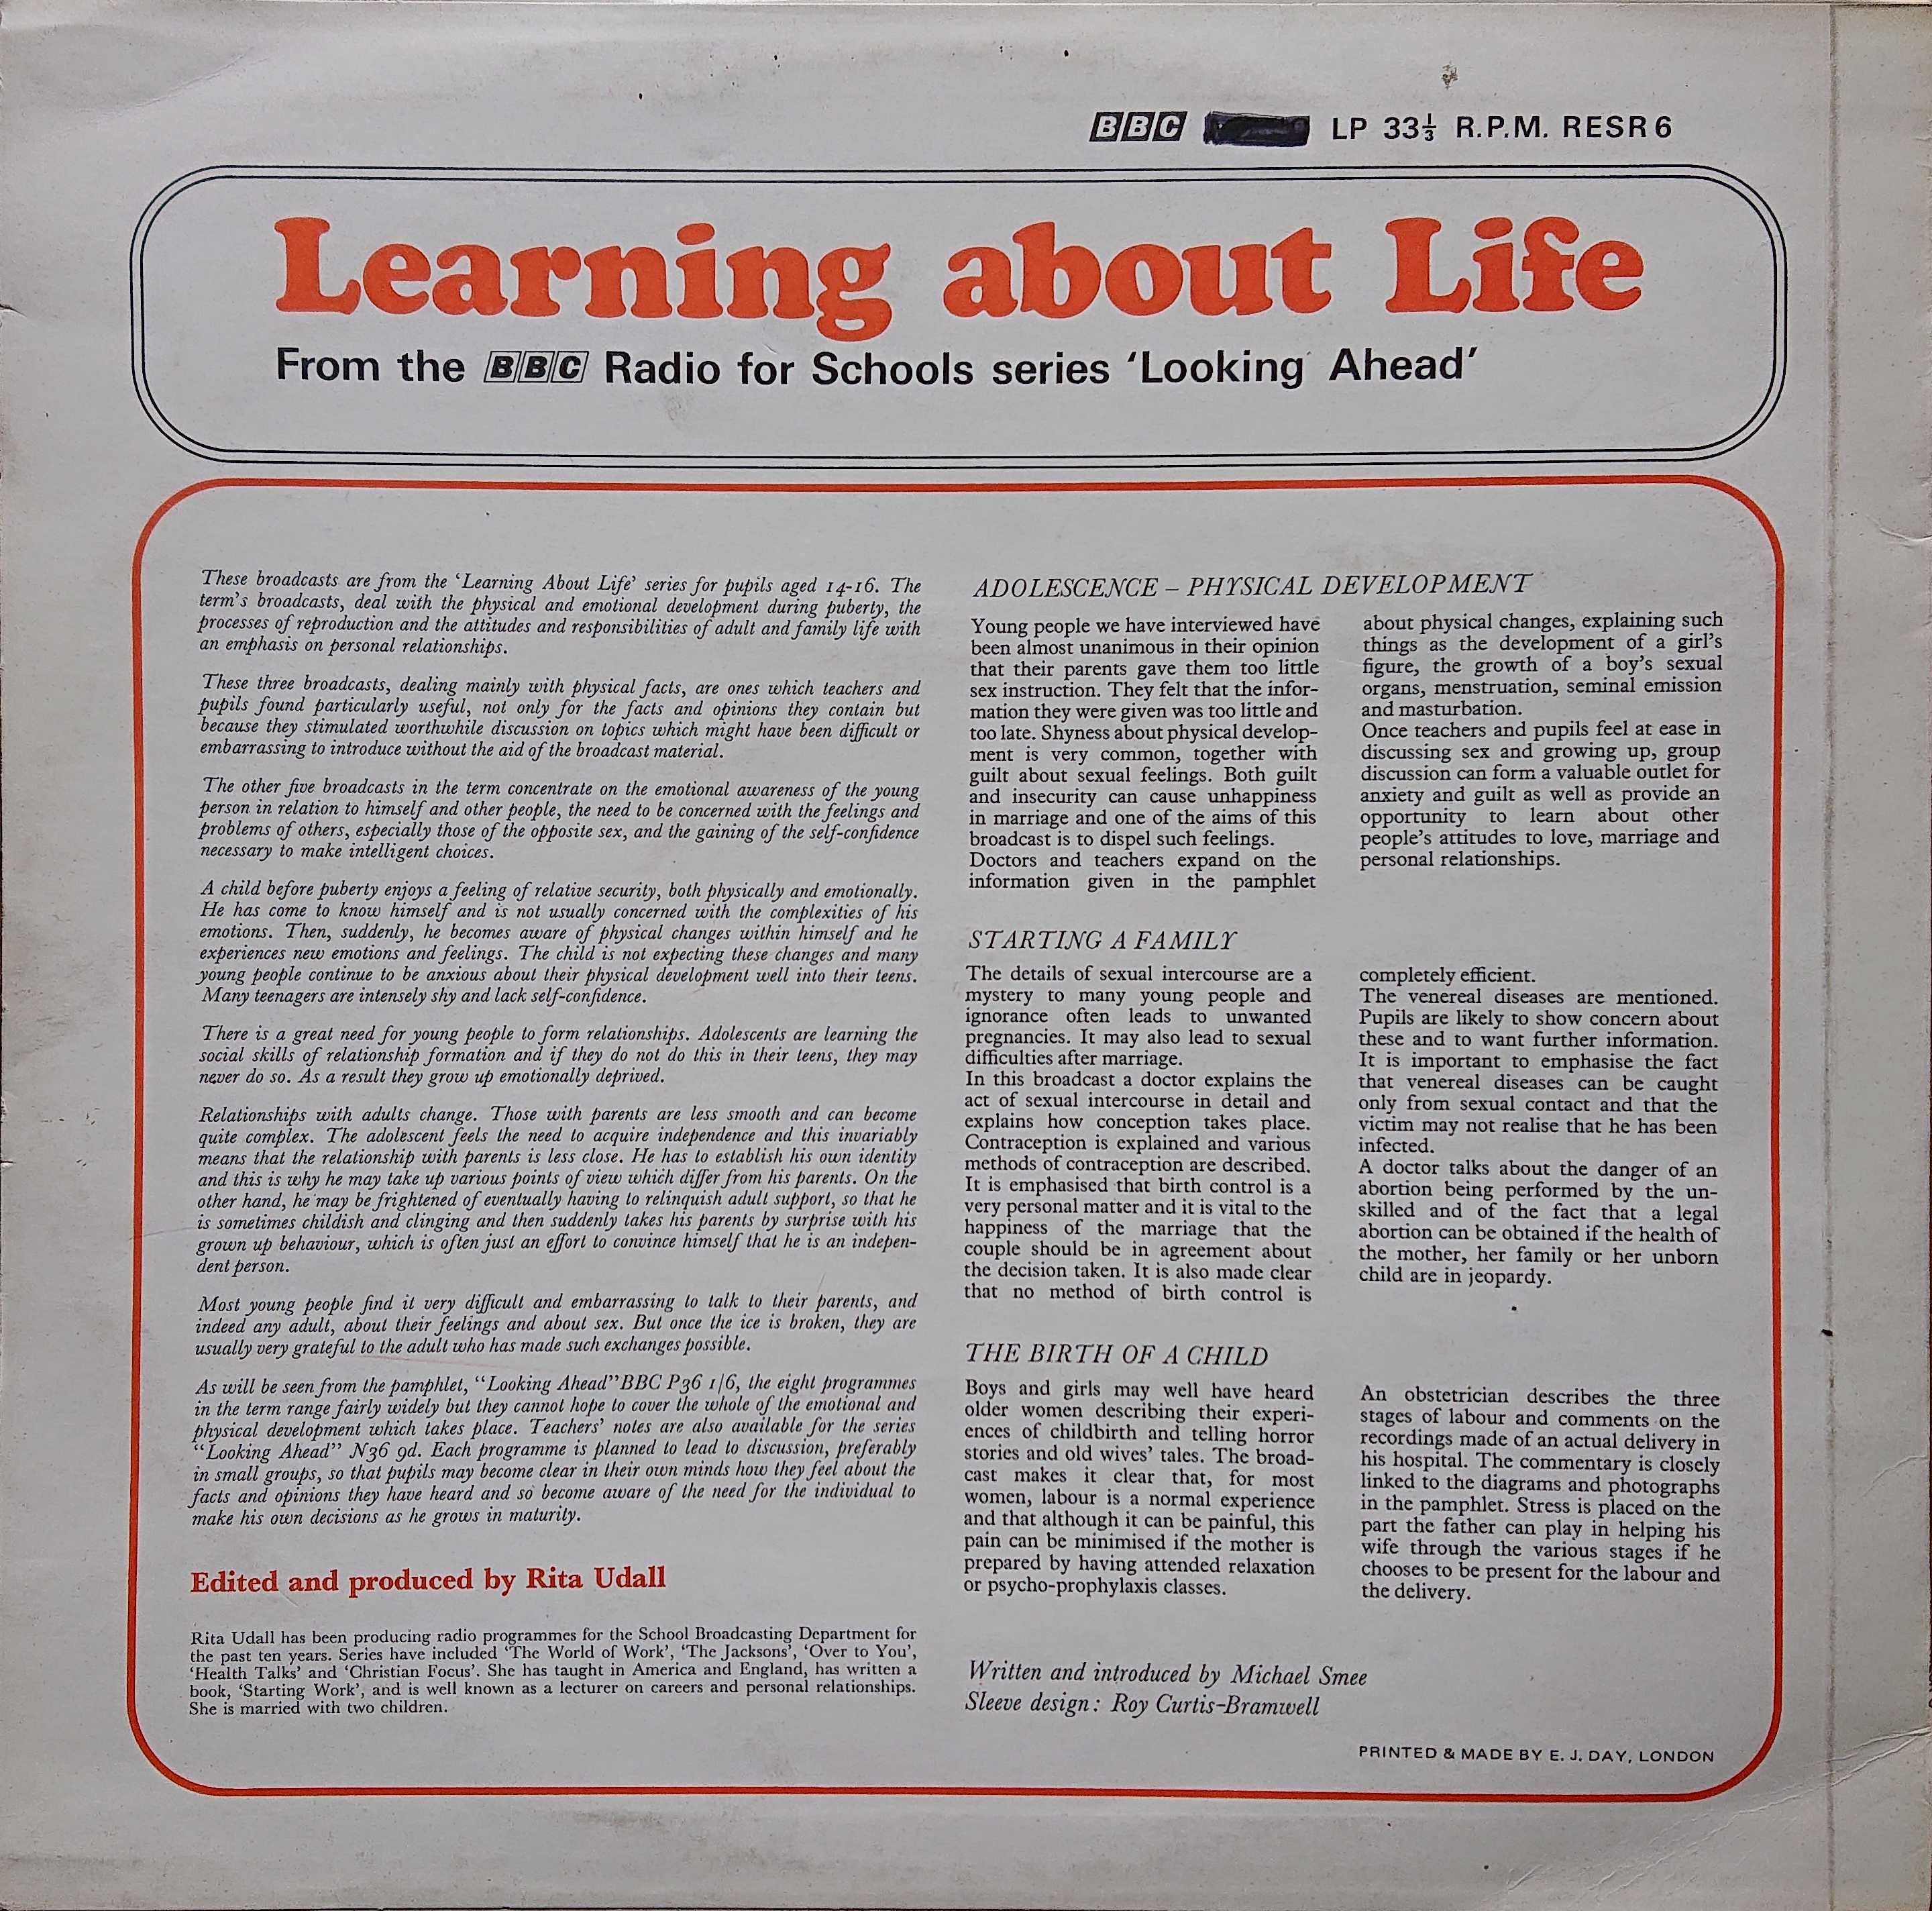 Picture of RESR 6 Learning about life by artist Michael Smee from the BBC records and Tapes library